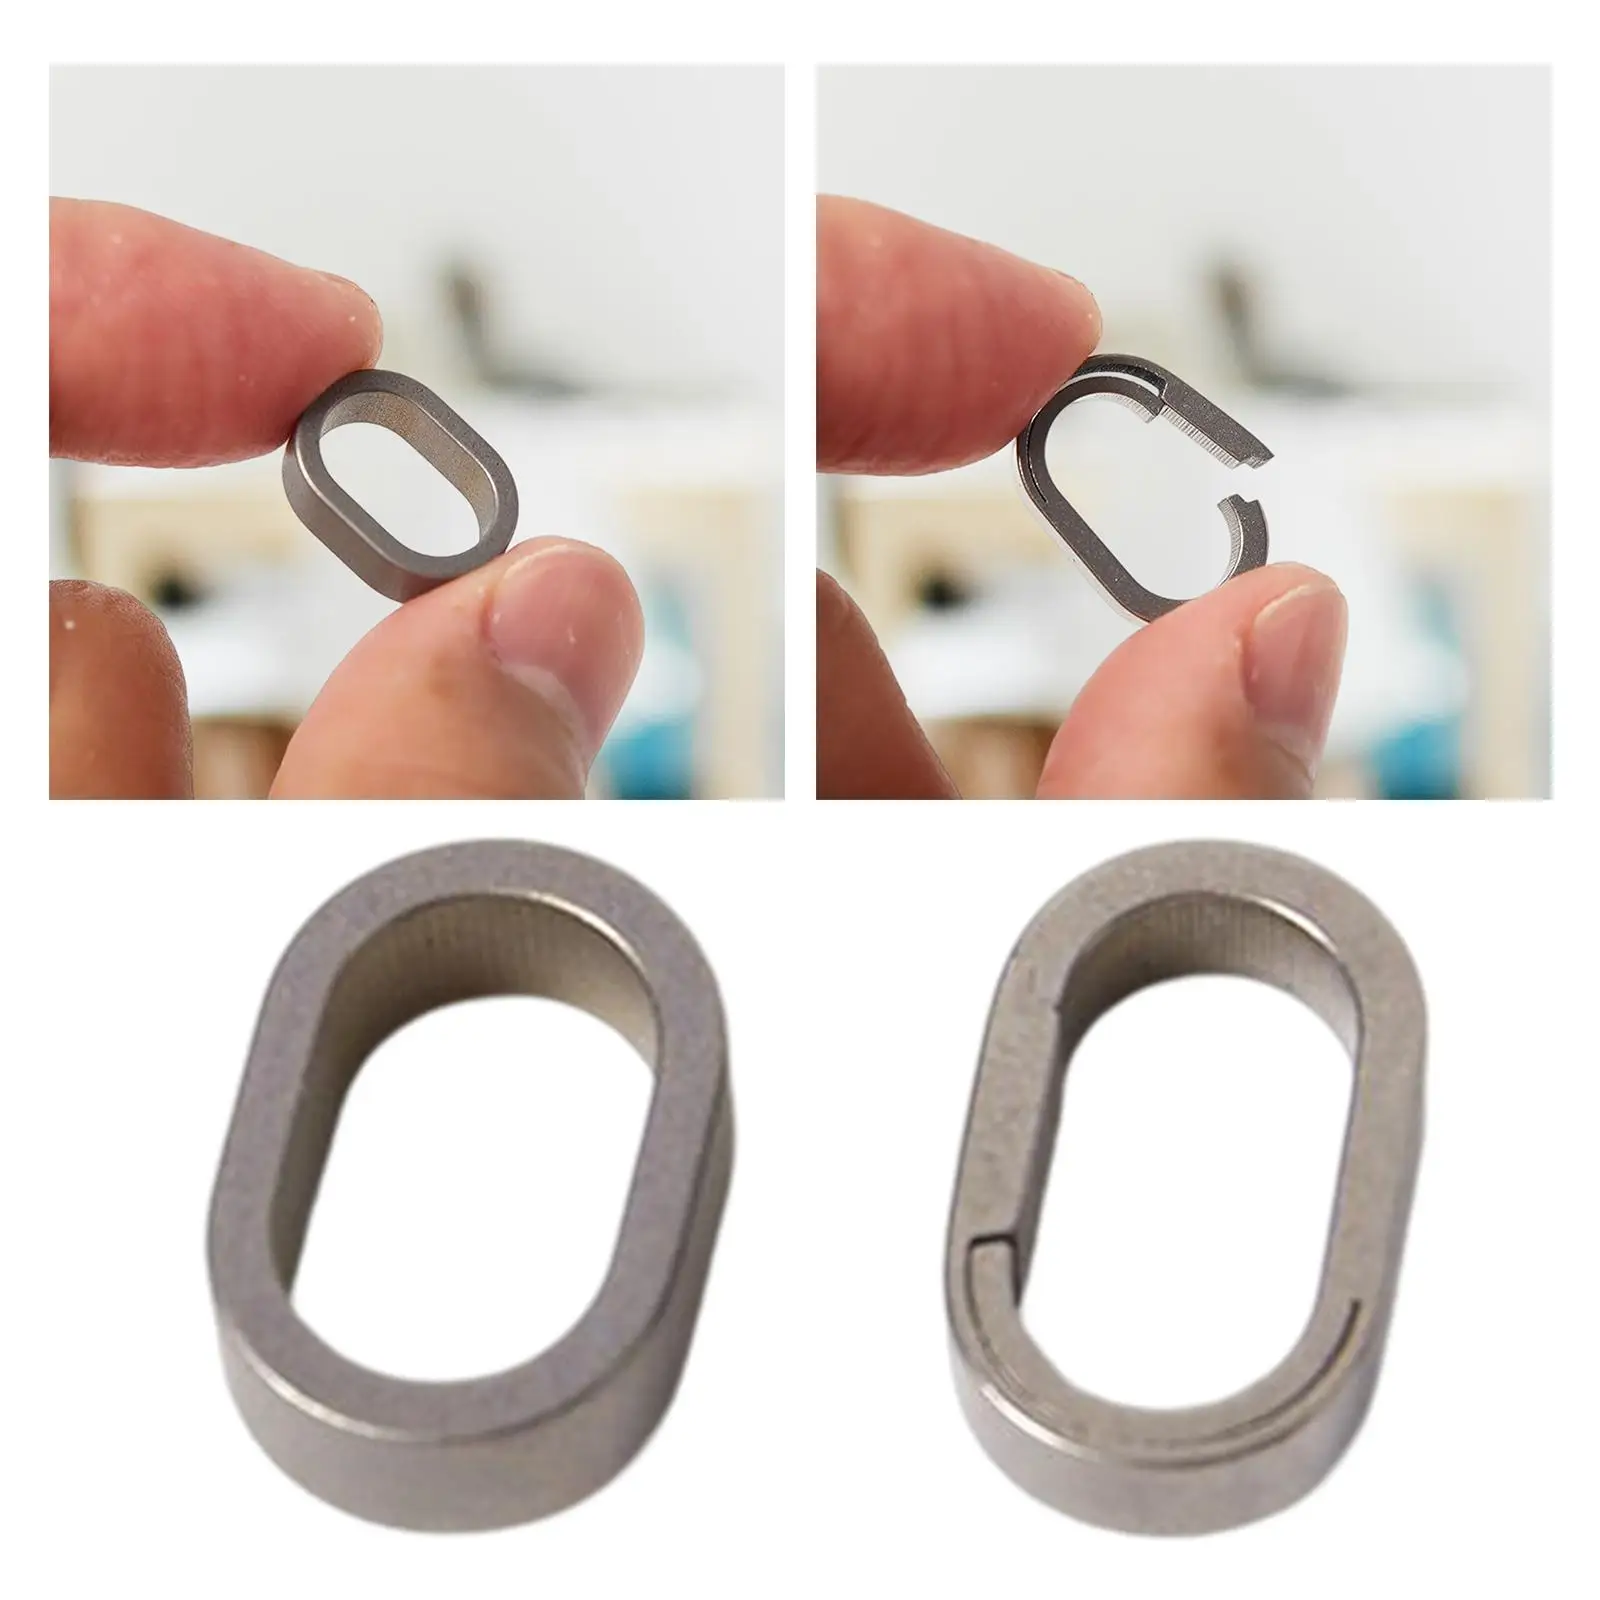 Keychain Rings Keyring Holder Detachable Multifunctional Key Rings Accessories Clips Mini DIY Outdoor Tool for Waist Belt